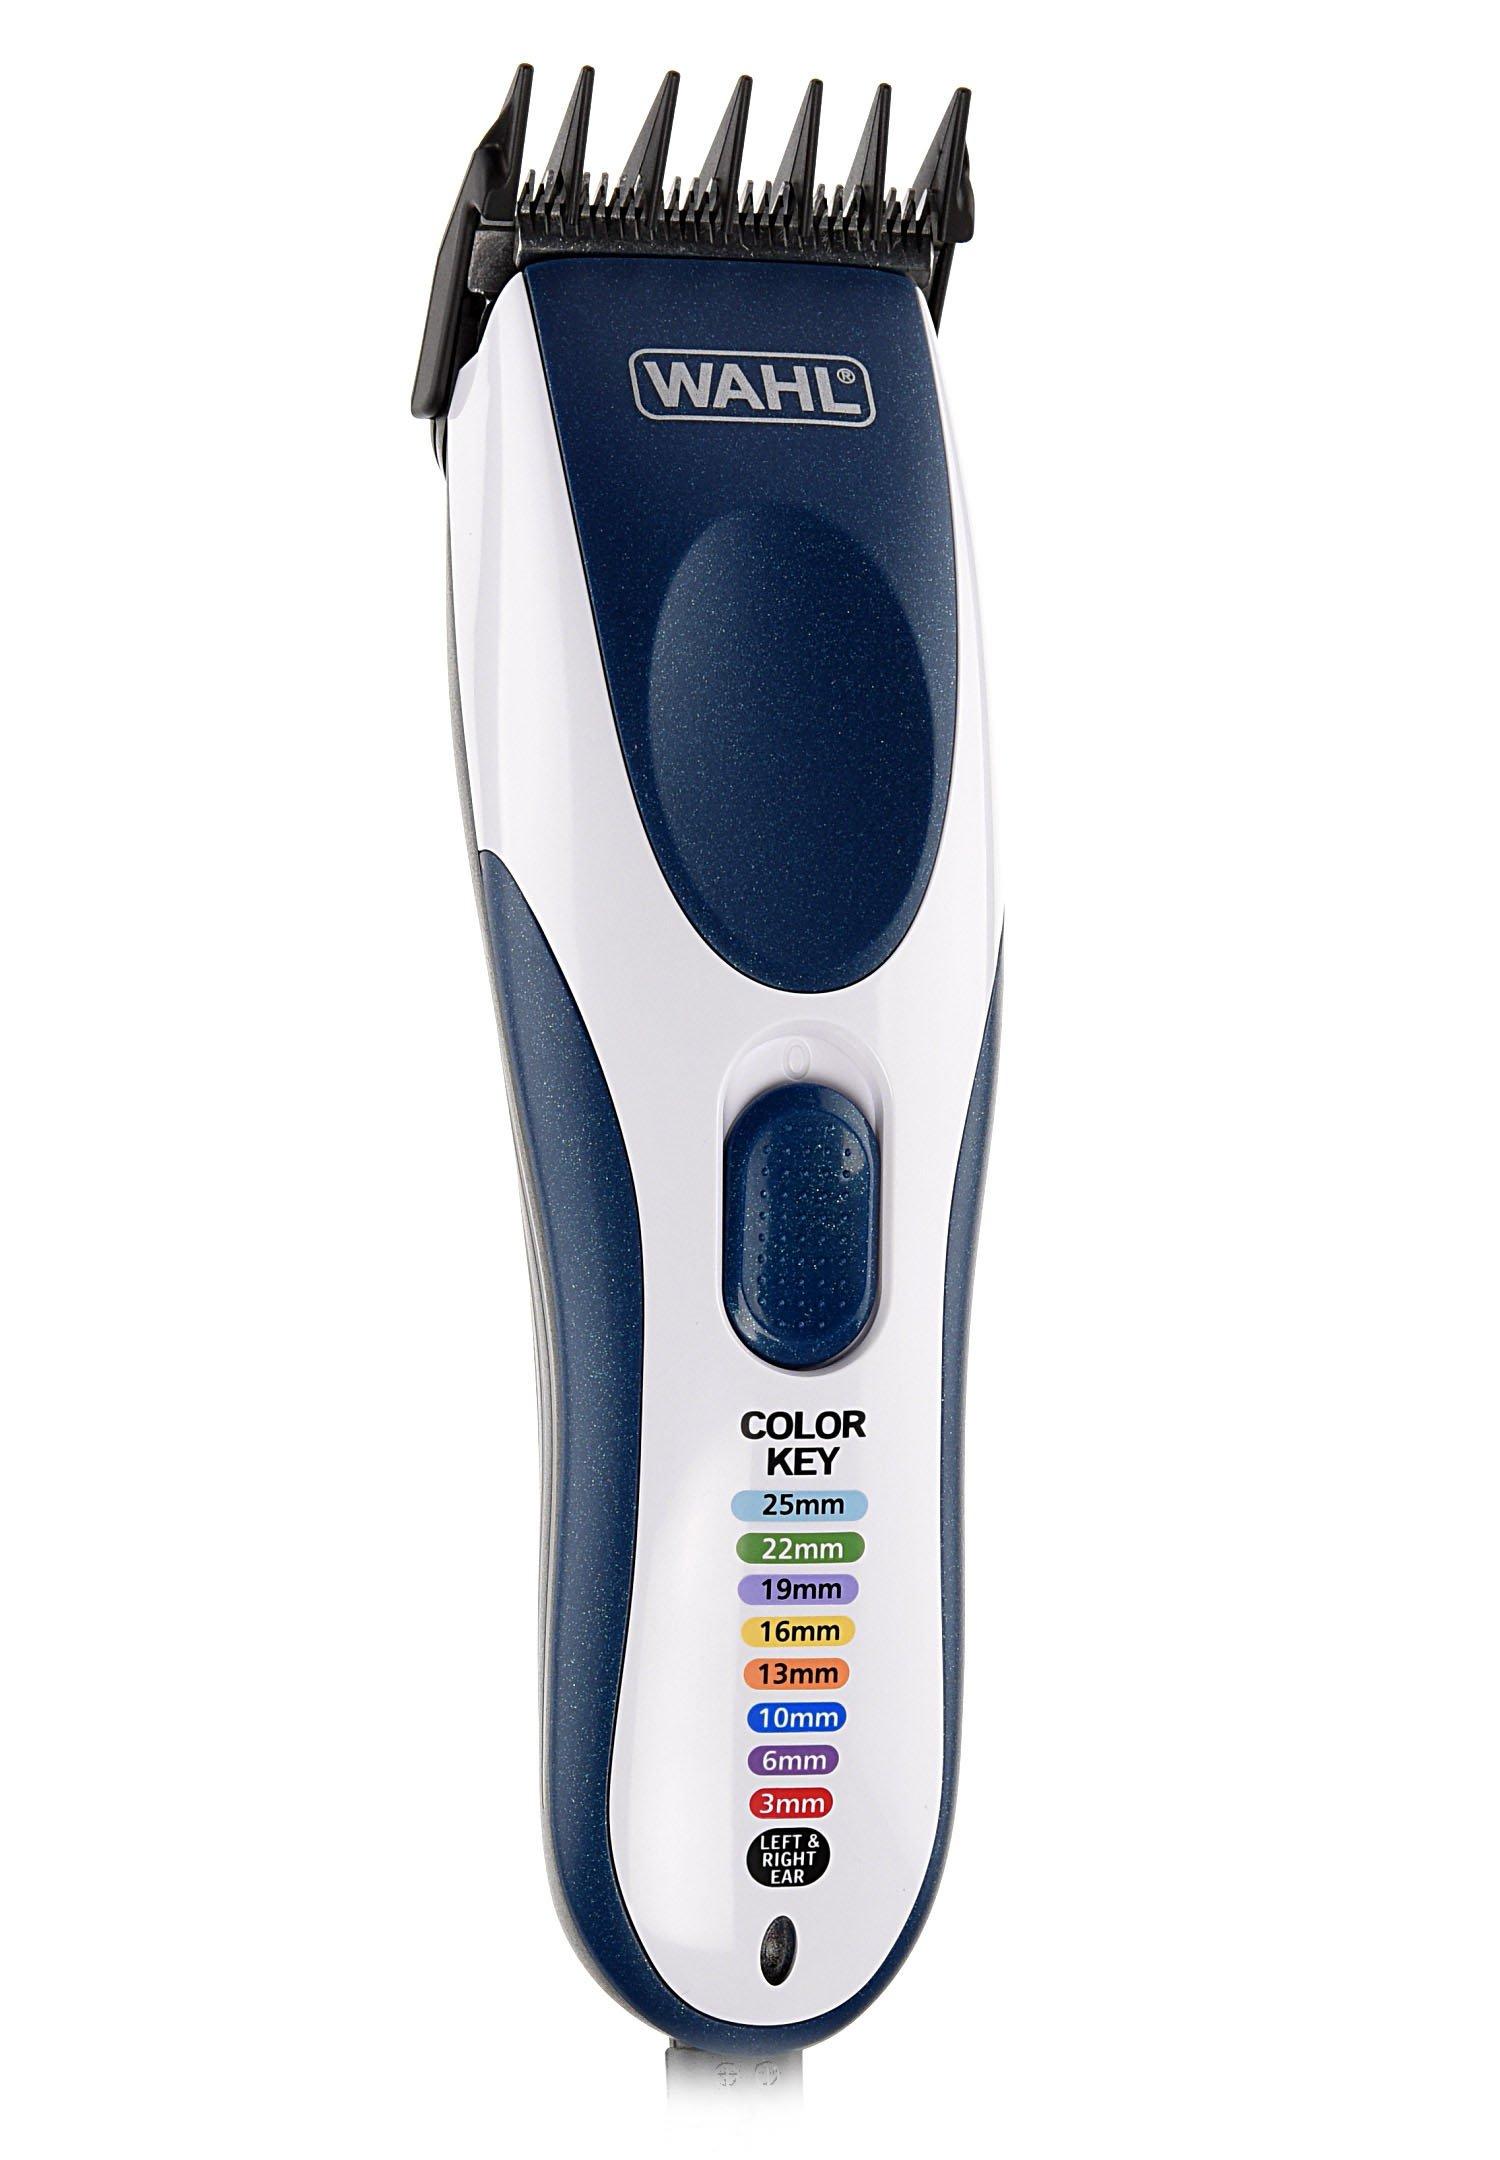 wahl 9649 not cutting